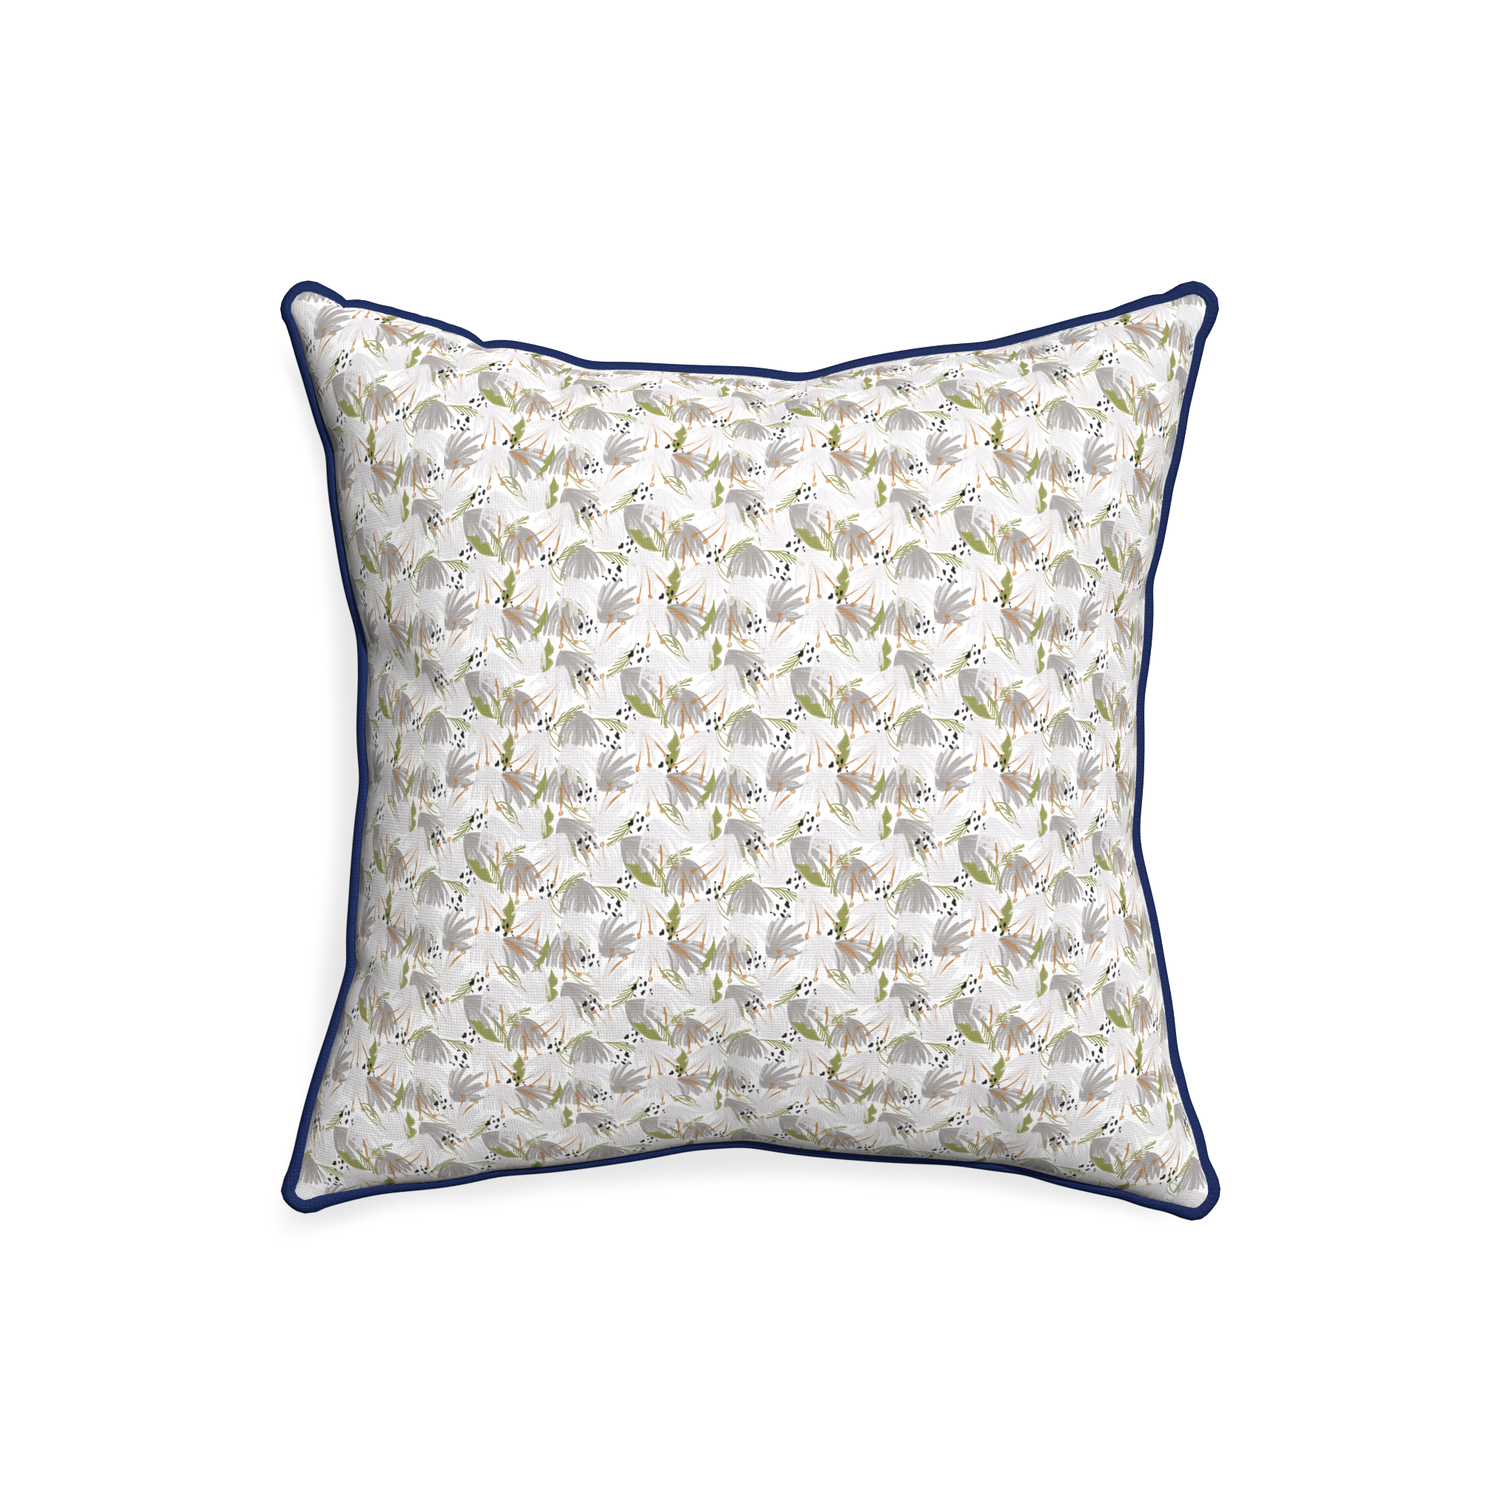 20-square eden grey custom grey floralpillow with midnight piping on white background